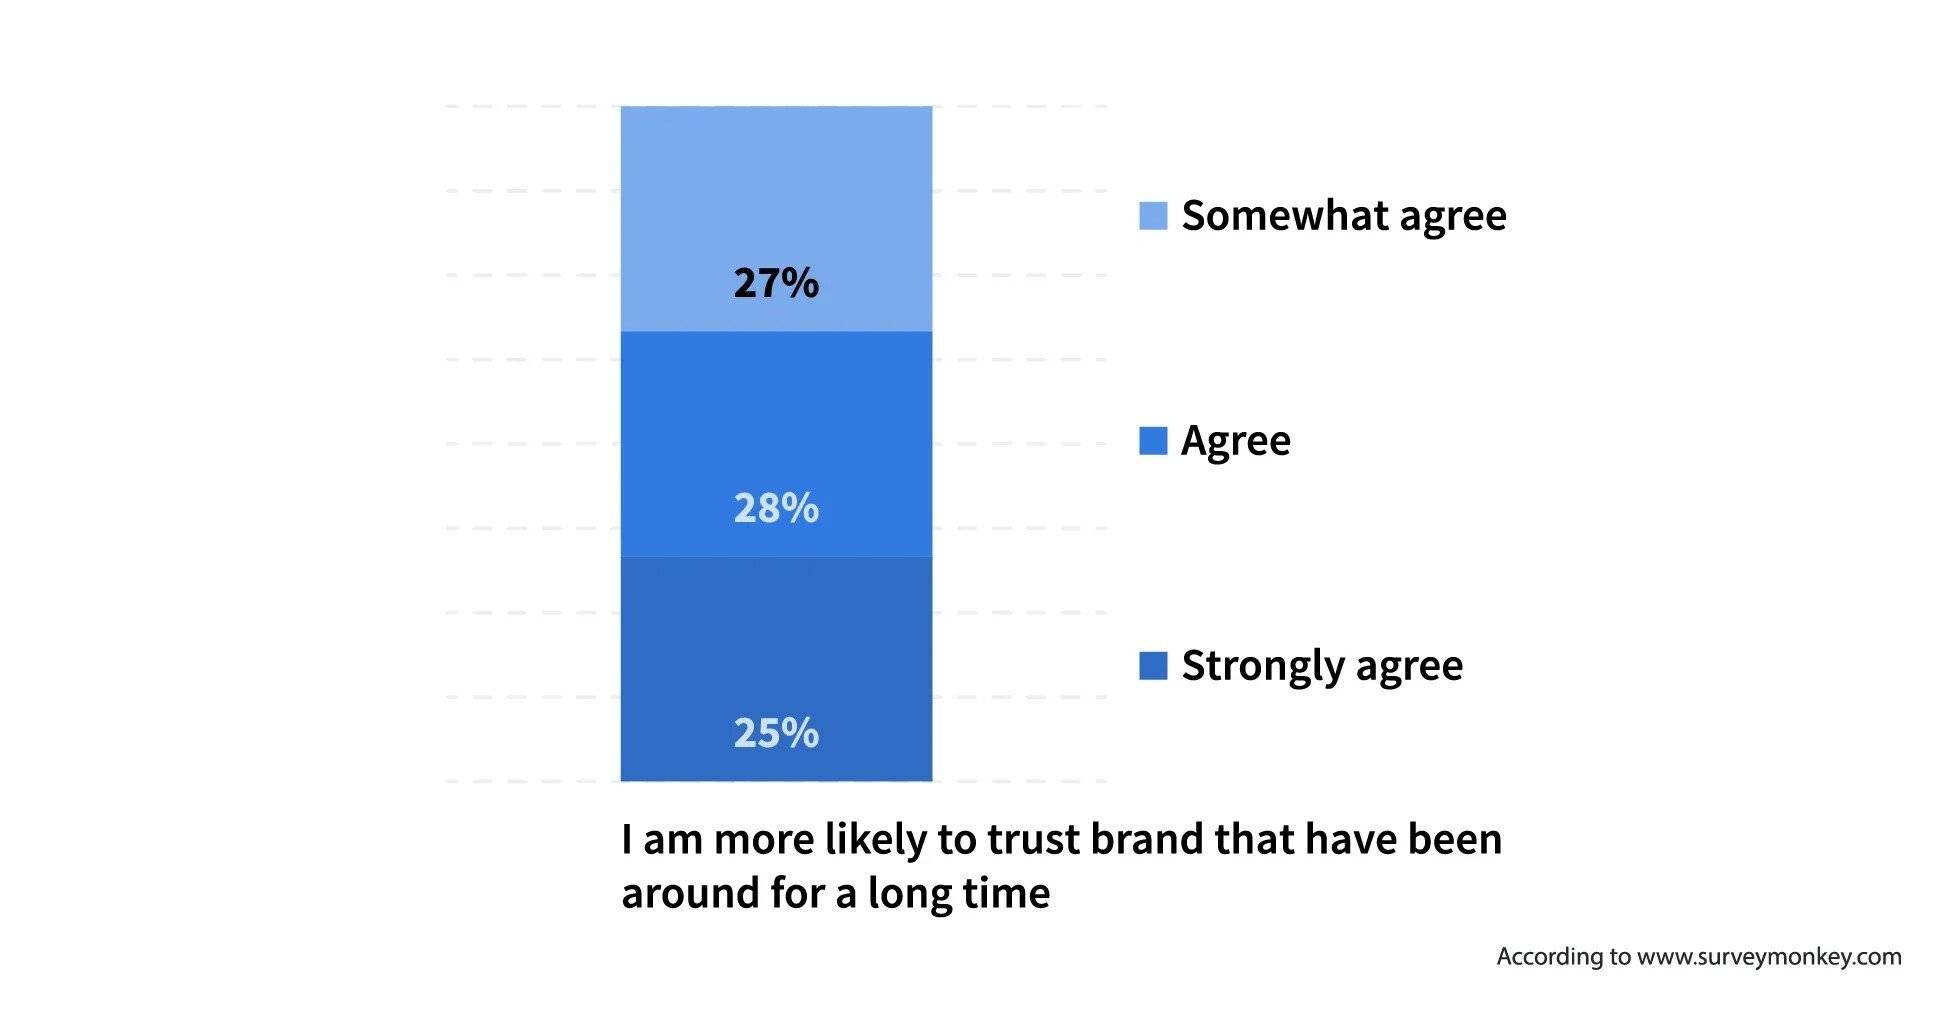 Results of a SurveyMonkey study showing that 80% of customers are more likely to trust a brand that has been around for a long time.